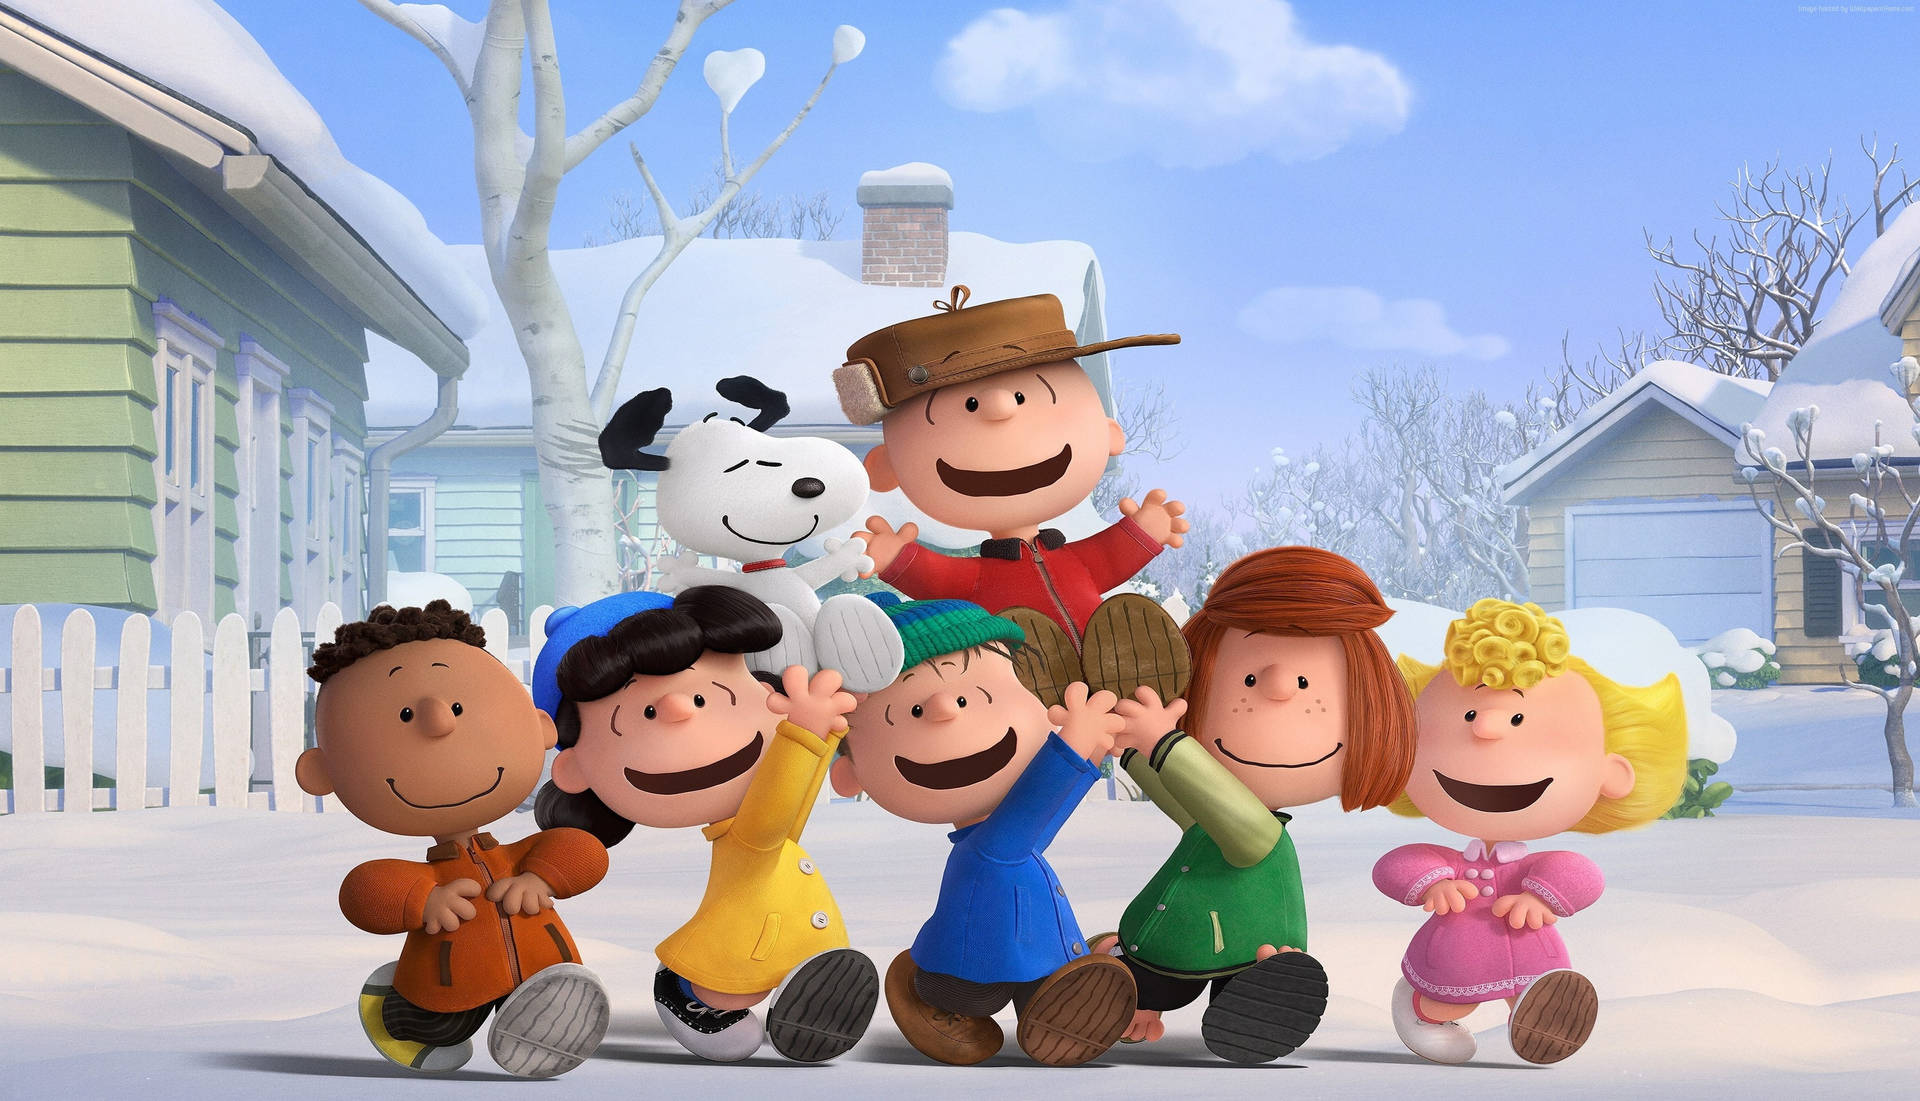 Peanuts Characters In Winter